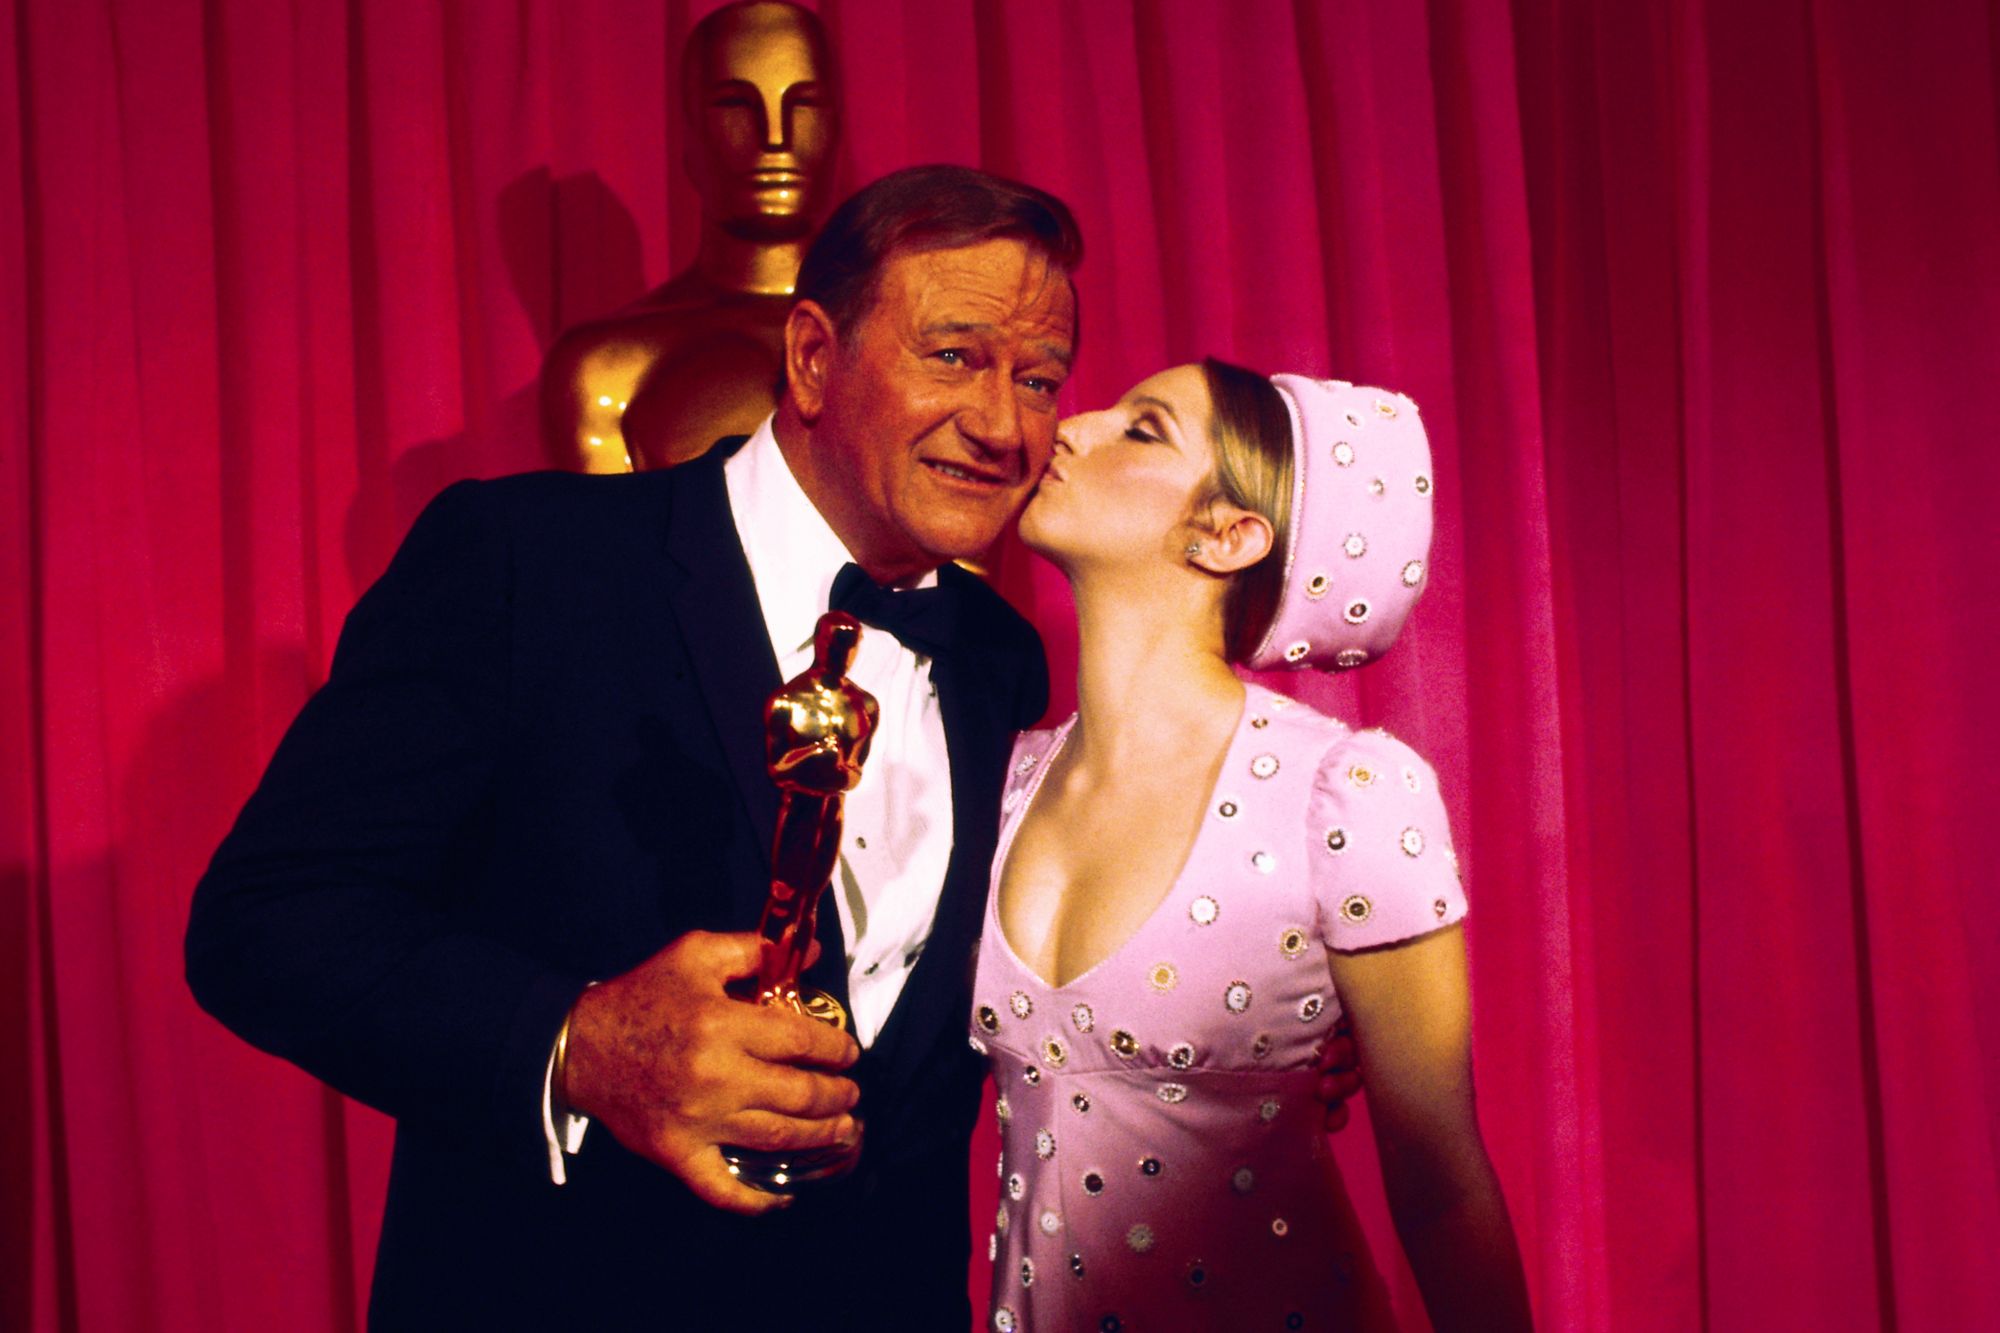 John Wayne and Barbra Streisand at the 1970 Oscars. She's kissing him on the cheek, while he holds his Academy Award. They're standing in front of an Oscar statue and red curtains.